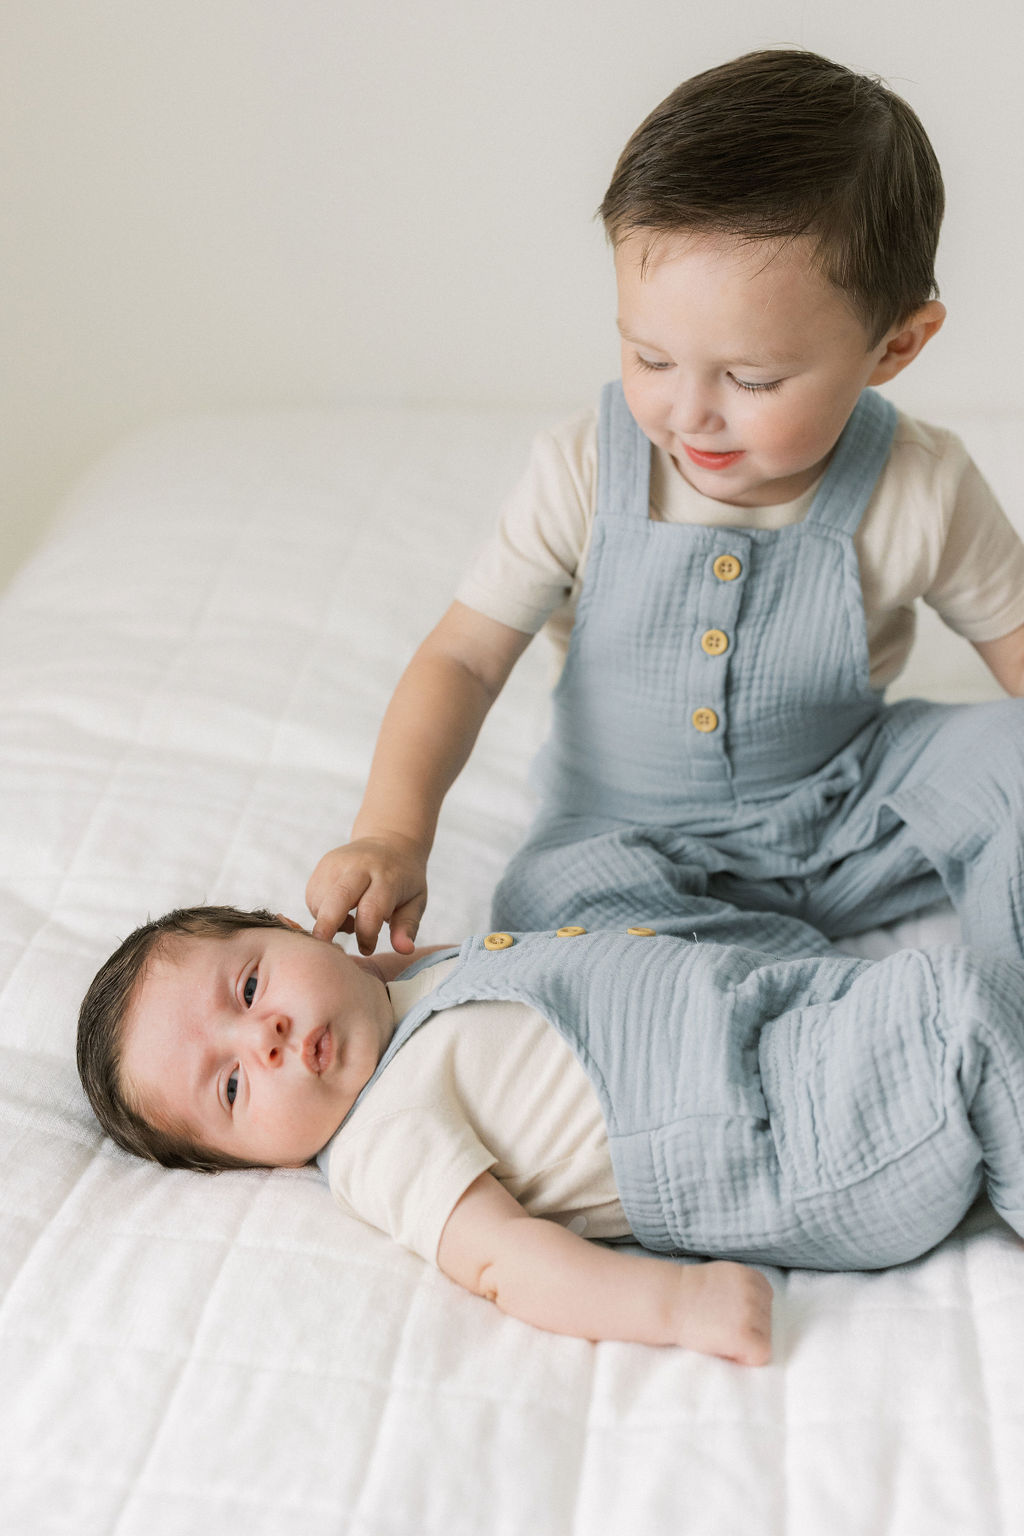 A young toddler boy in blue suspenders touches the cheek of his newborn baby brother laying in a matching suit in front of him